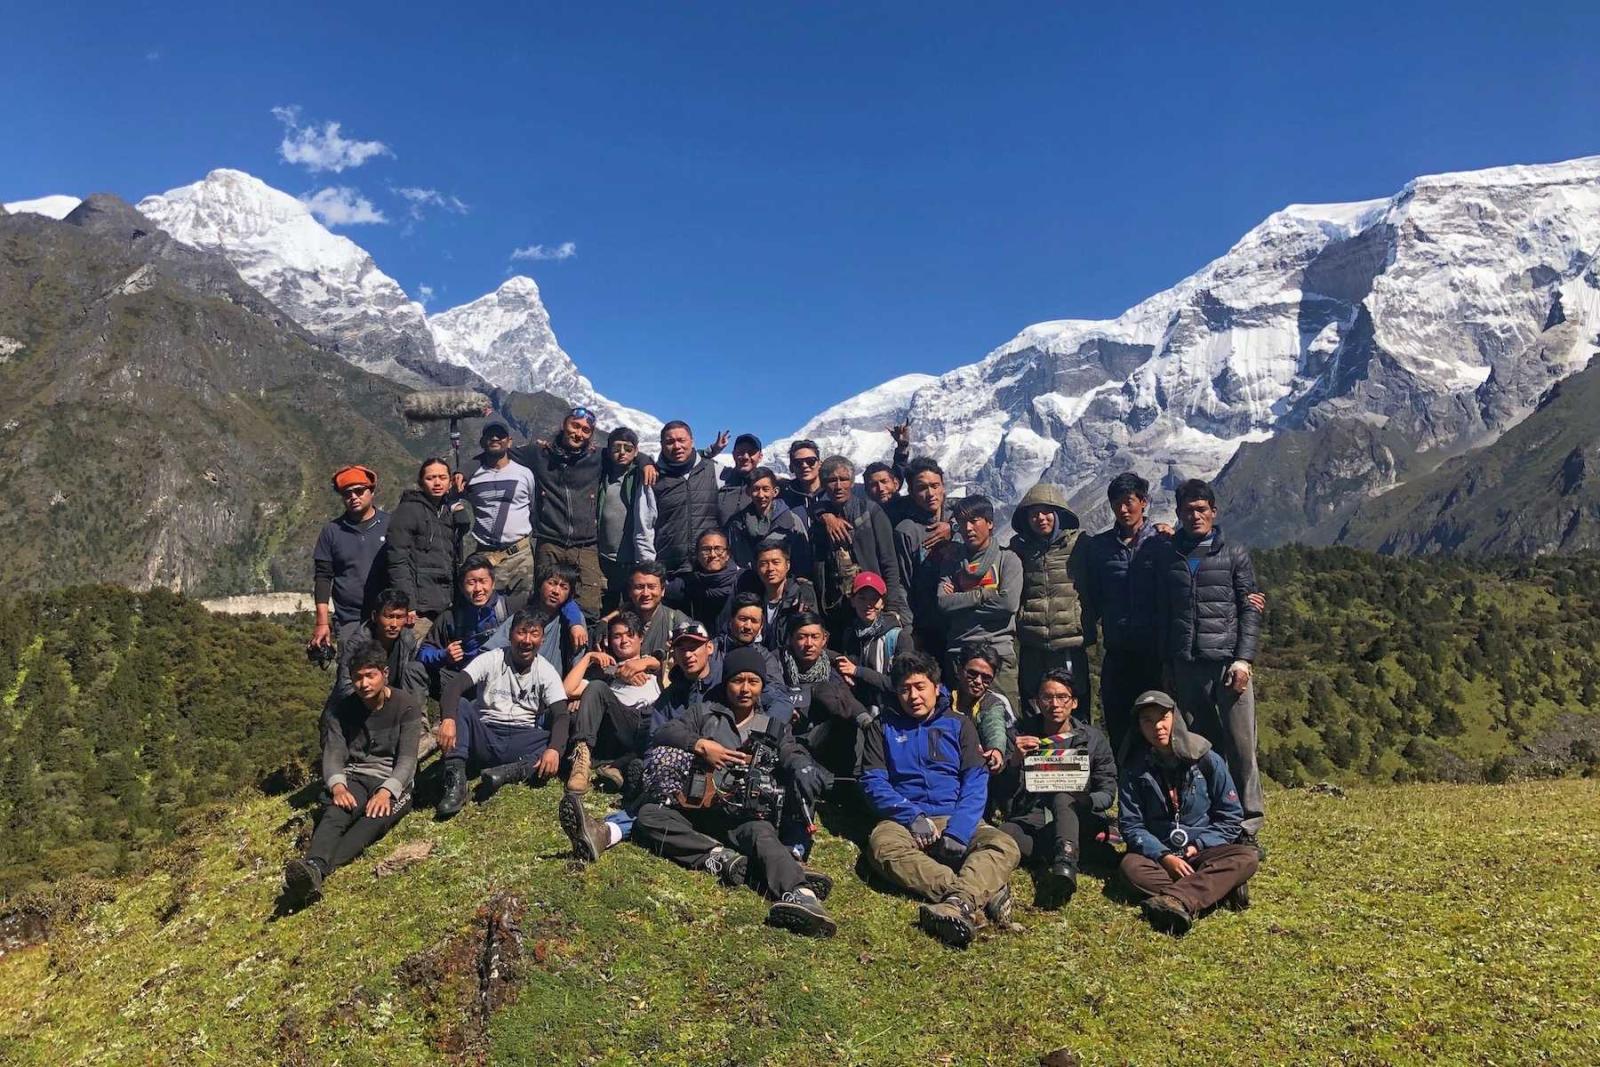 The film crew poses for a group photo with mountains in the background.